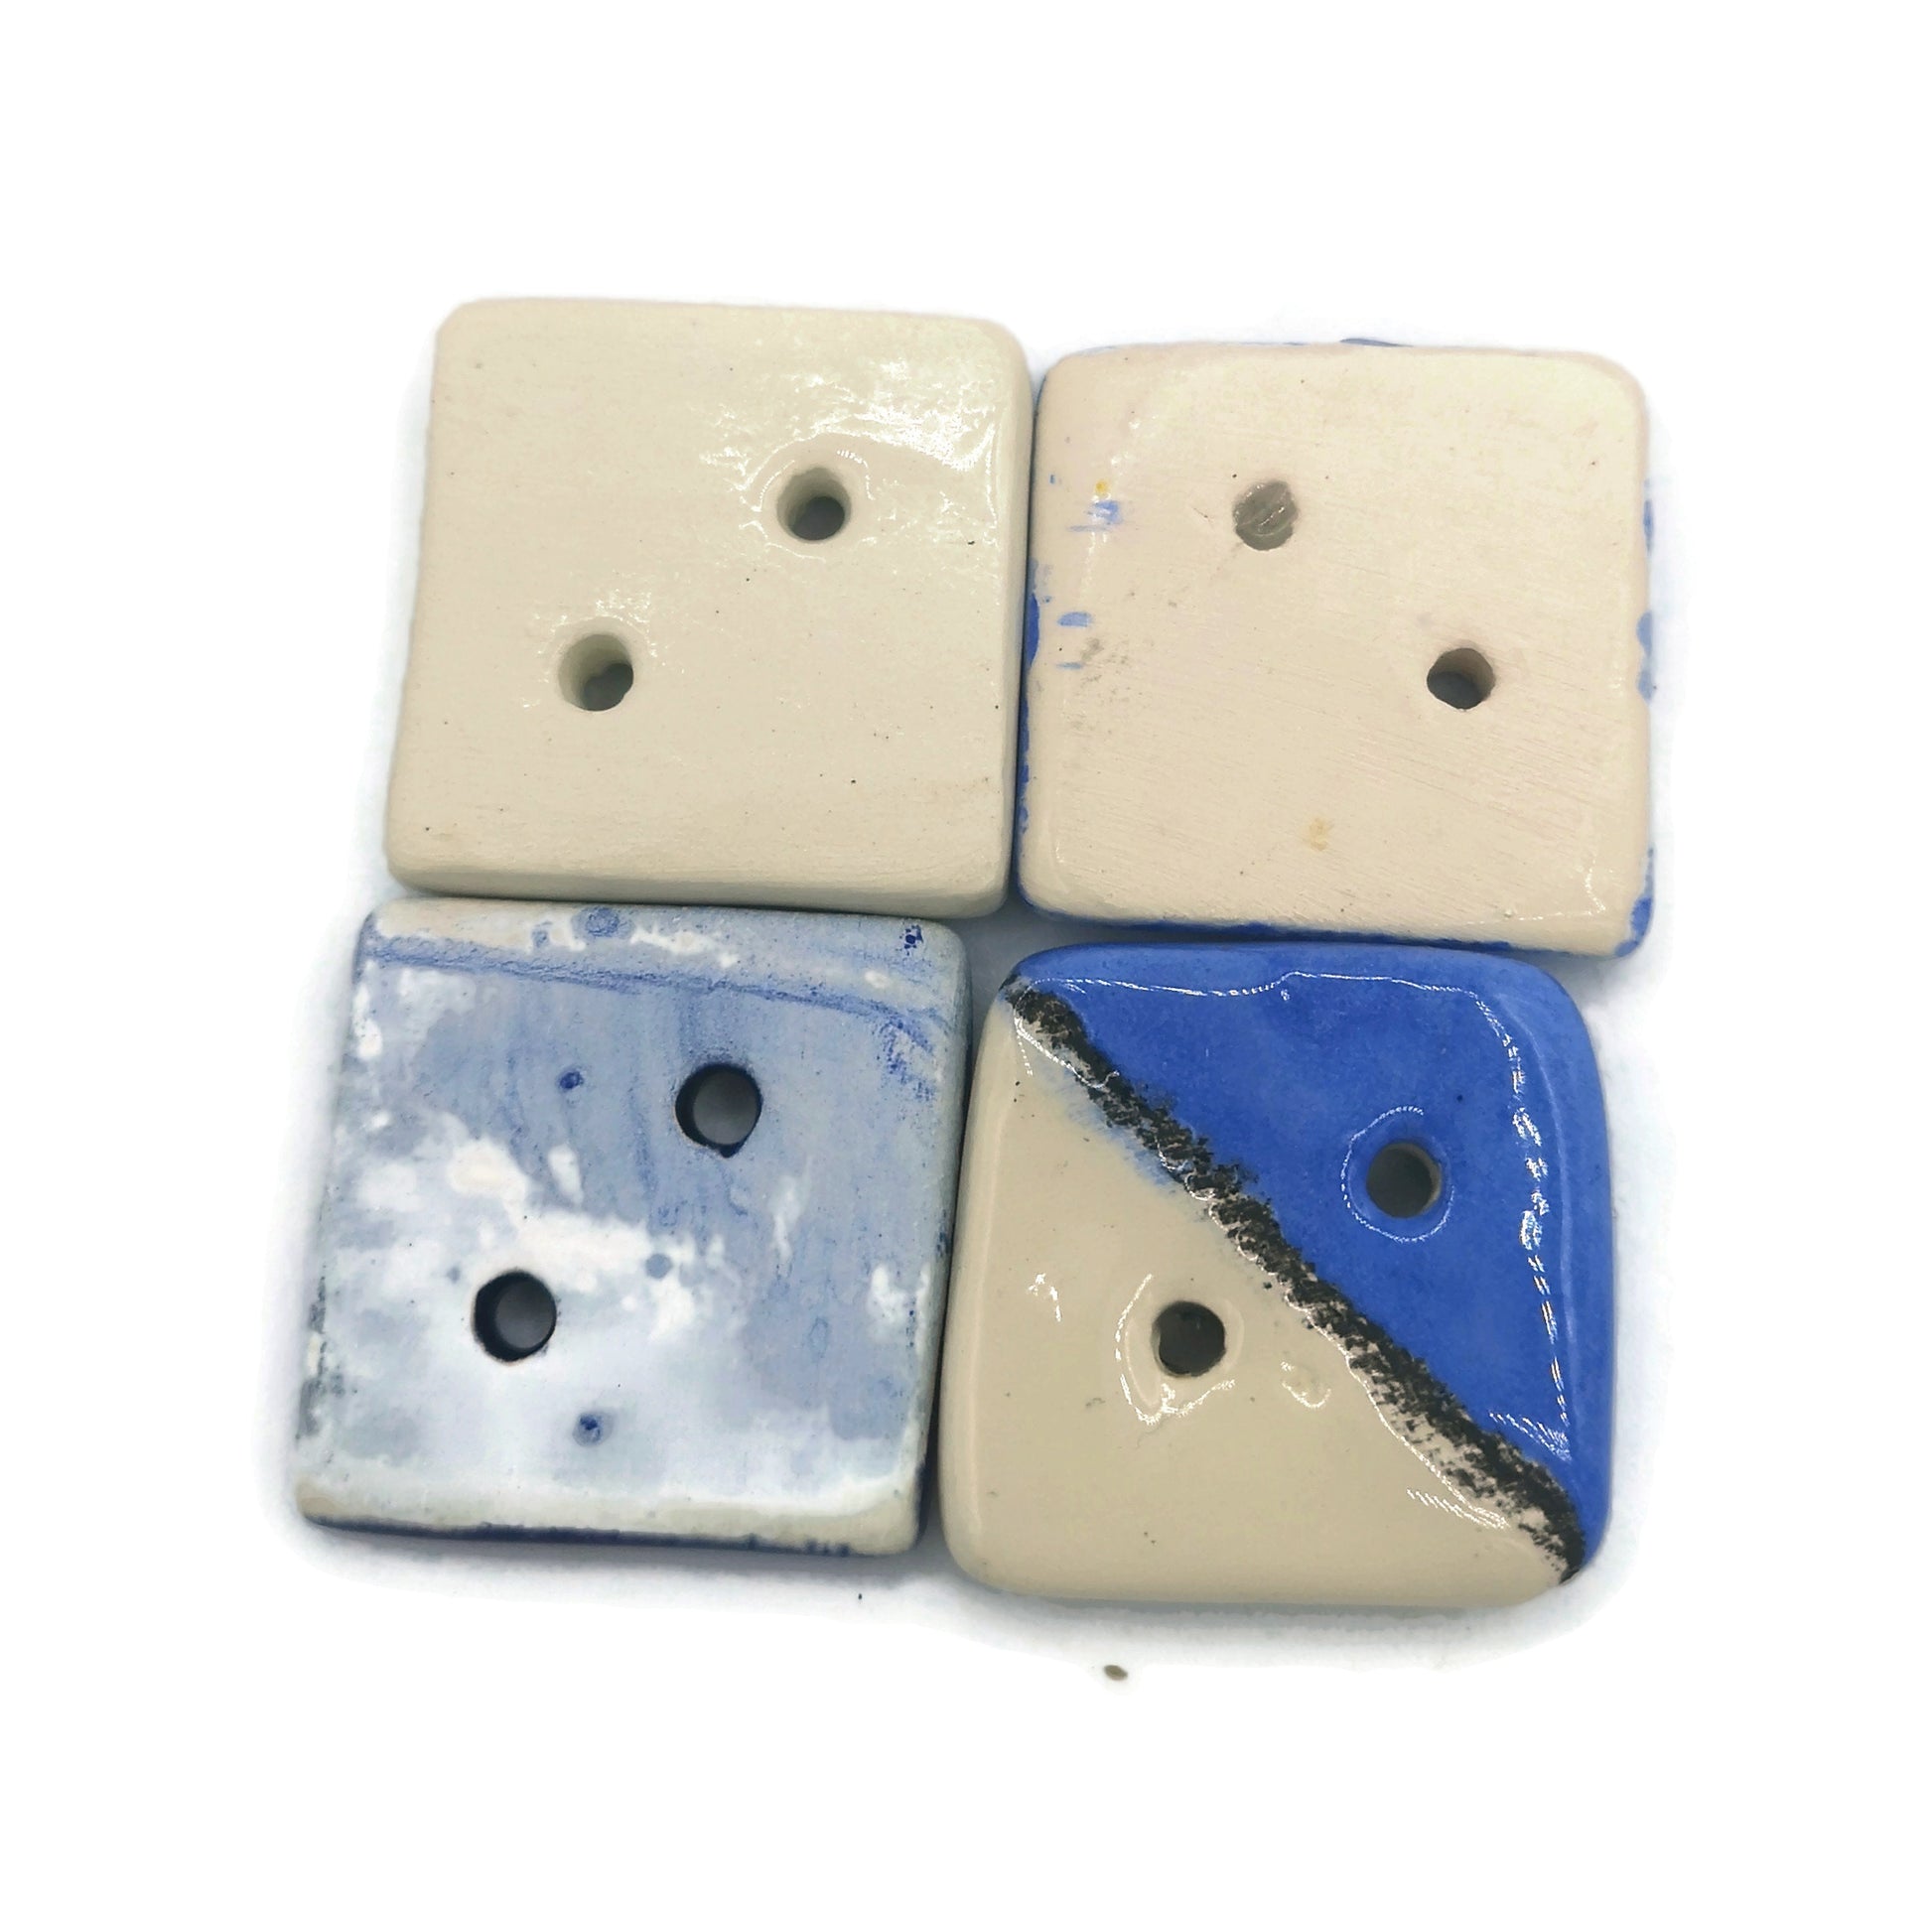 4Pc 30mm Handmade Ceramic Square Blue Sewing Buttons for Crafts, Elegant Extra Large Coat Buttons, Best Sellers Sewing Supplies And Notions - Ceramica Ana Rafael